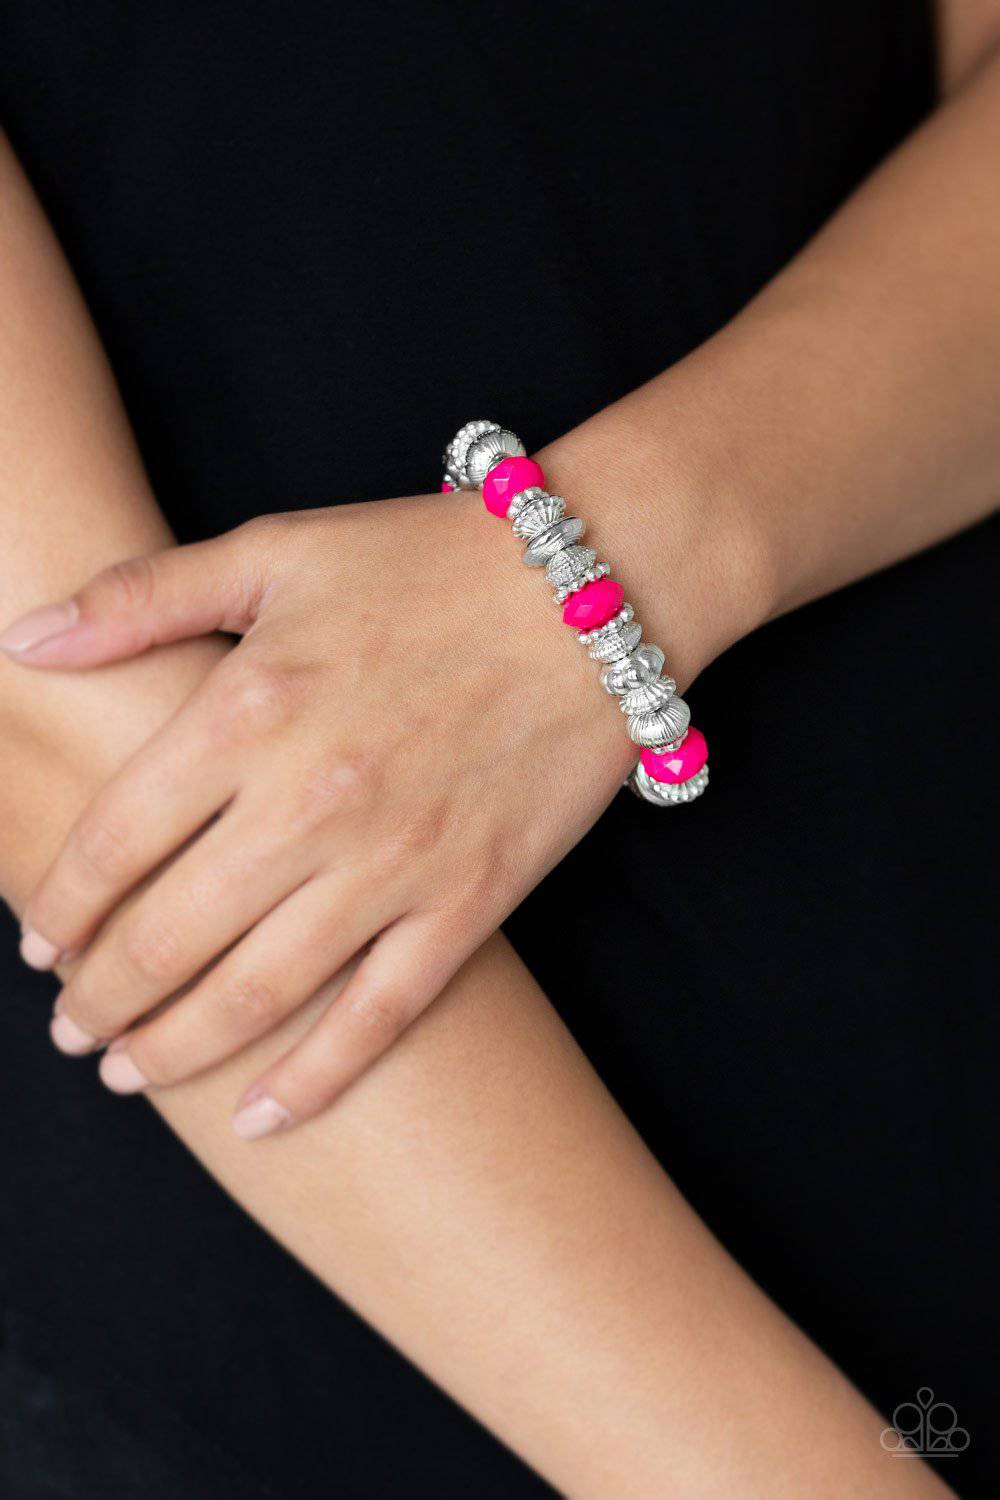 Live Life To The COLOR-fullest - Pink Bead Stretchy Bracelet - Paparazzi Accessories - GlaMarous Titi Jewels